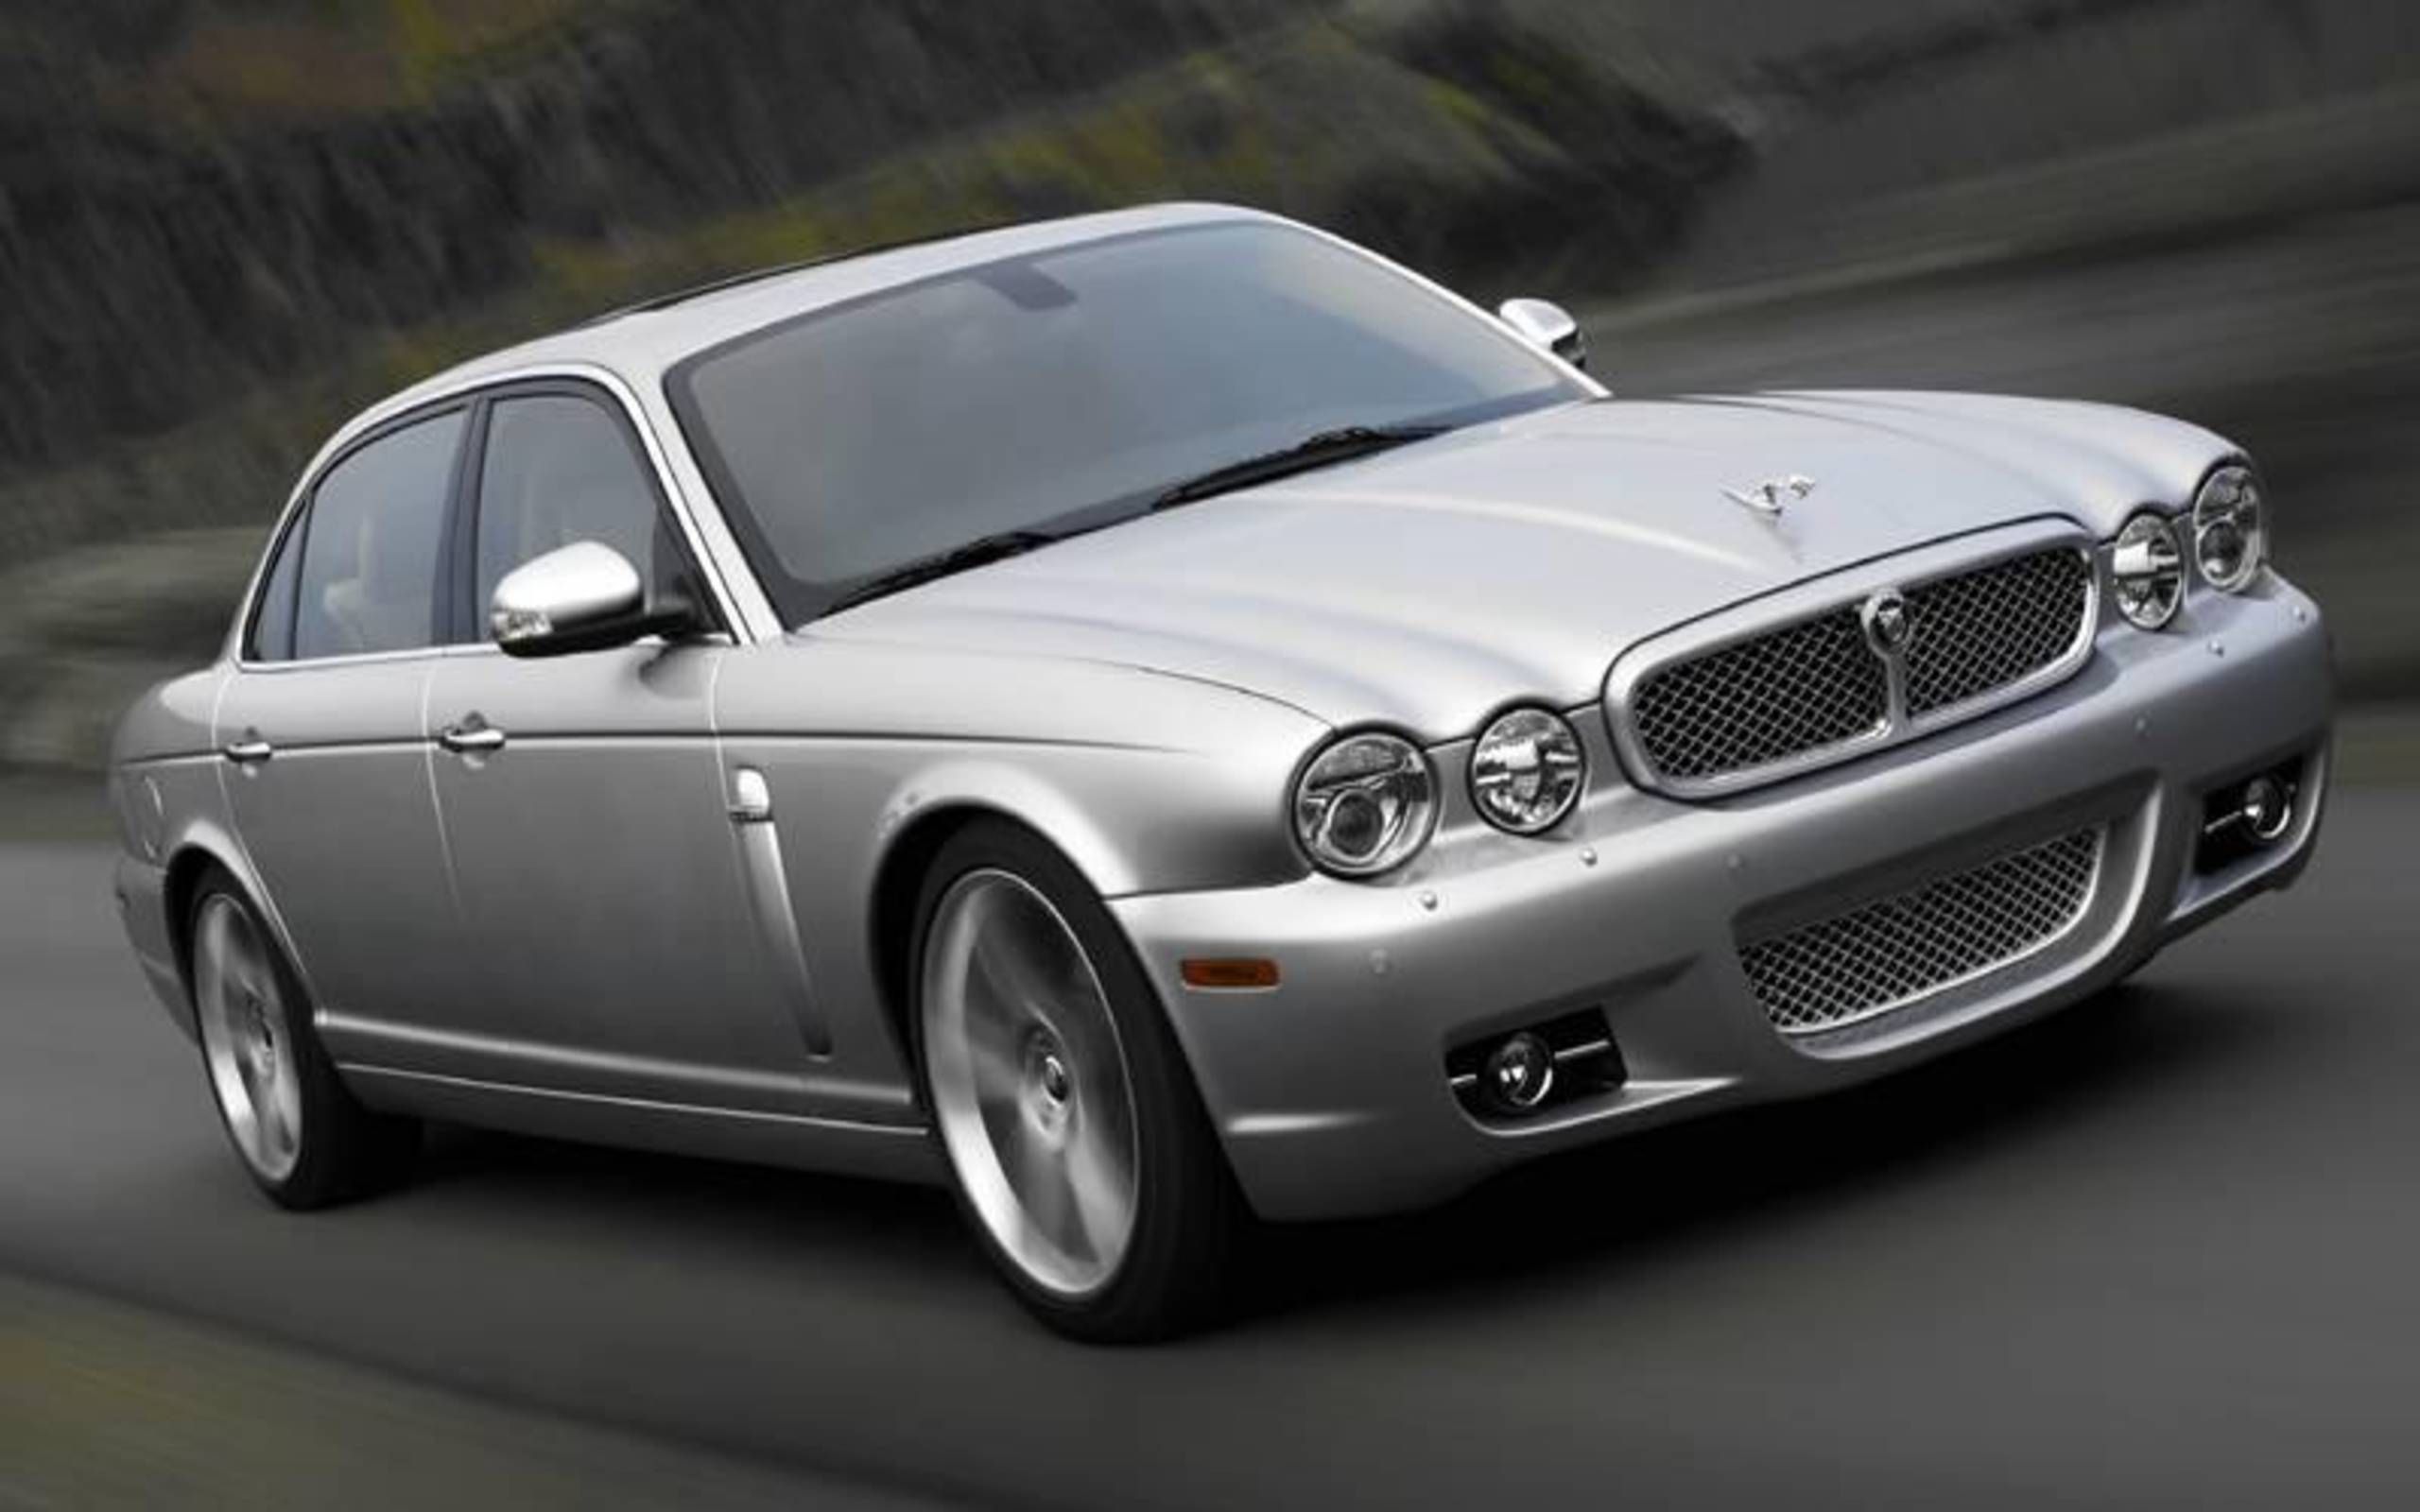 2008 Jaguar XJ: Flagship's style boosted before 2010 overhaul